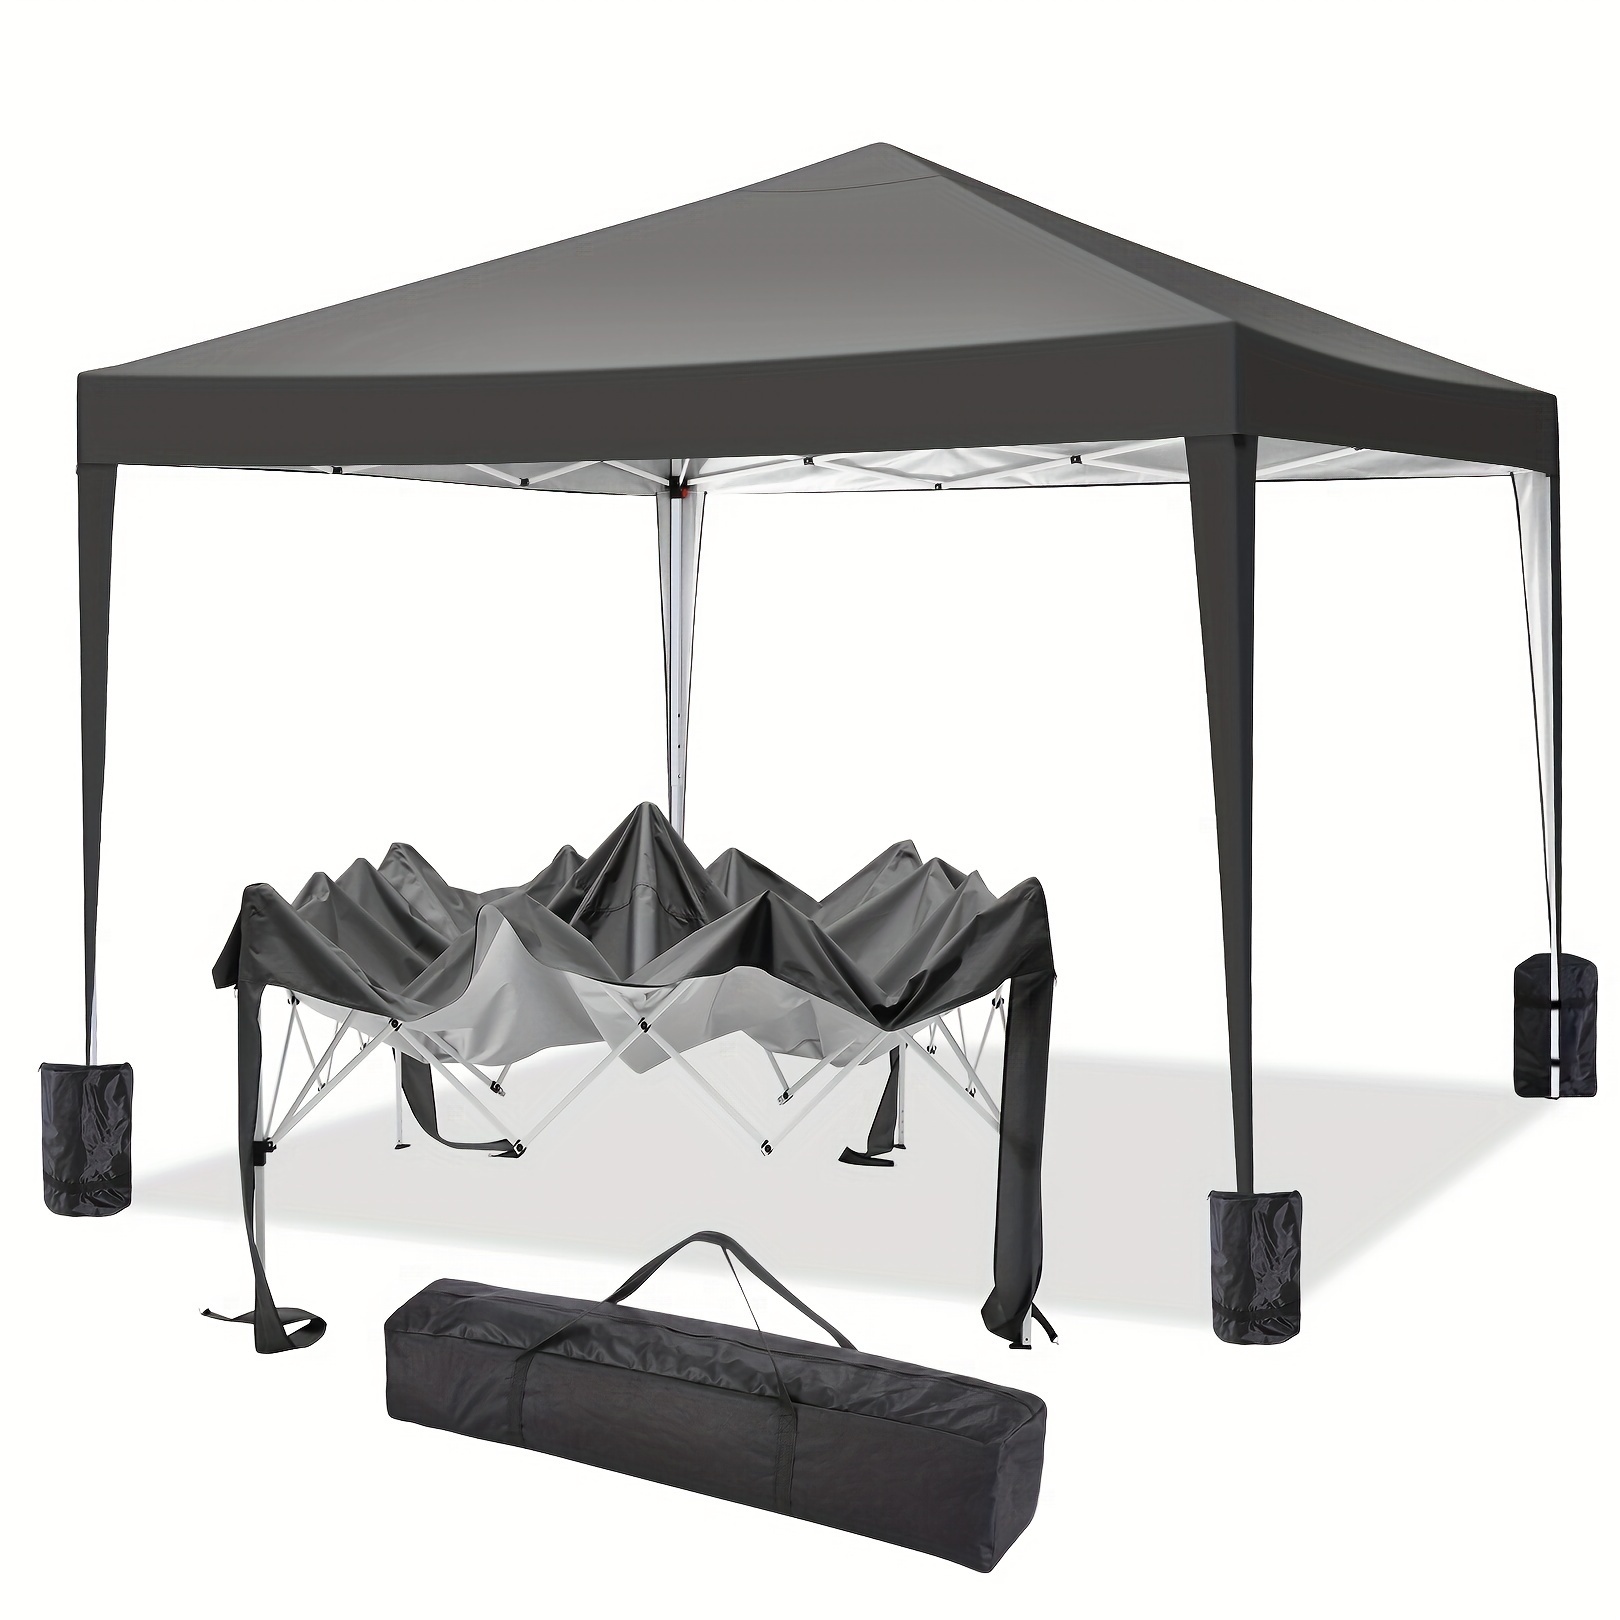 

Hoteel 10x10ft Pop-up Canopy Tent, Outdoor Party Tent, Waterproof And Uv Resistant, Stable Structure, Easy To Carry, Height Adjustable